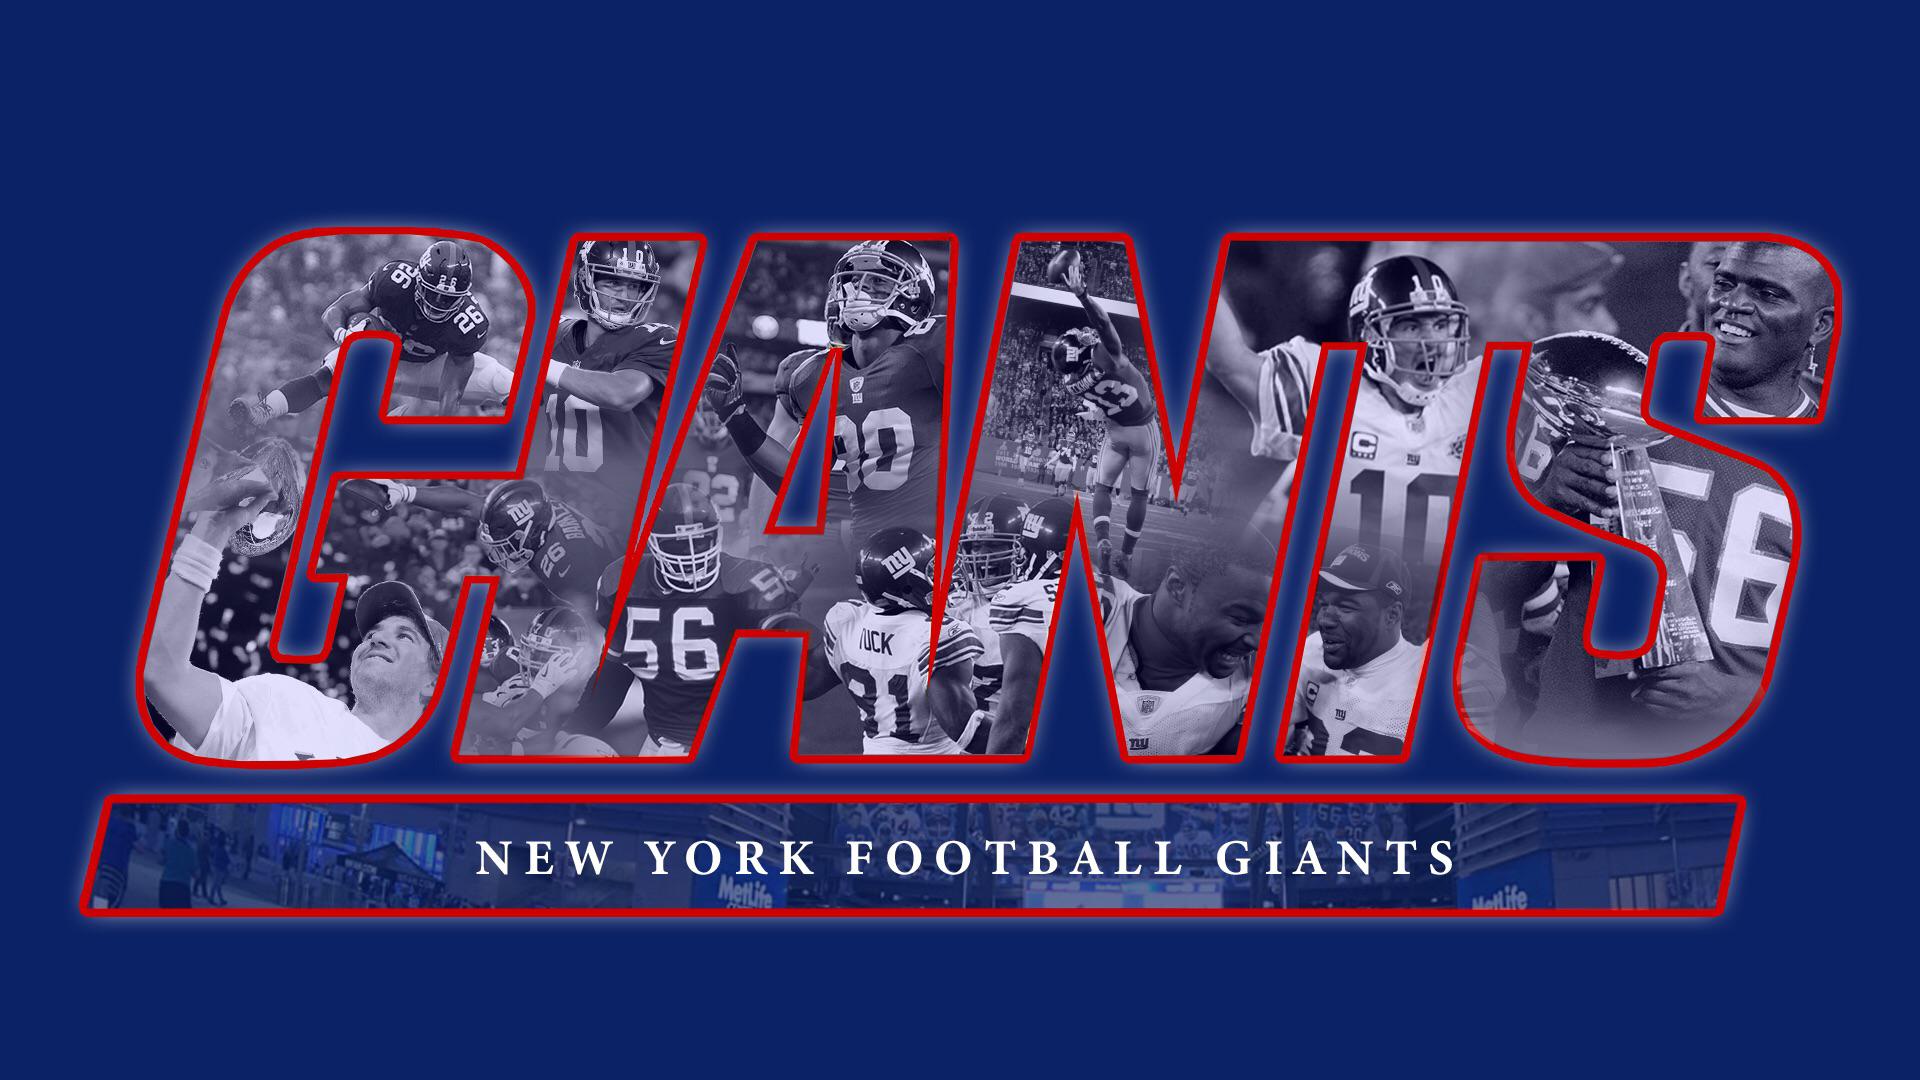 Giants wallpaper i made, for you boys to use as you see fit